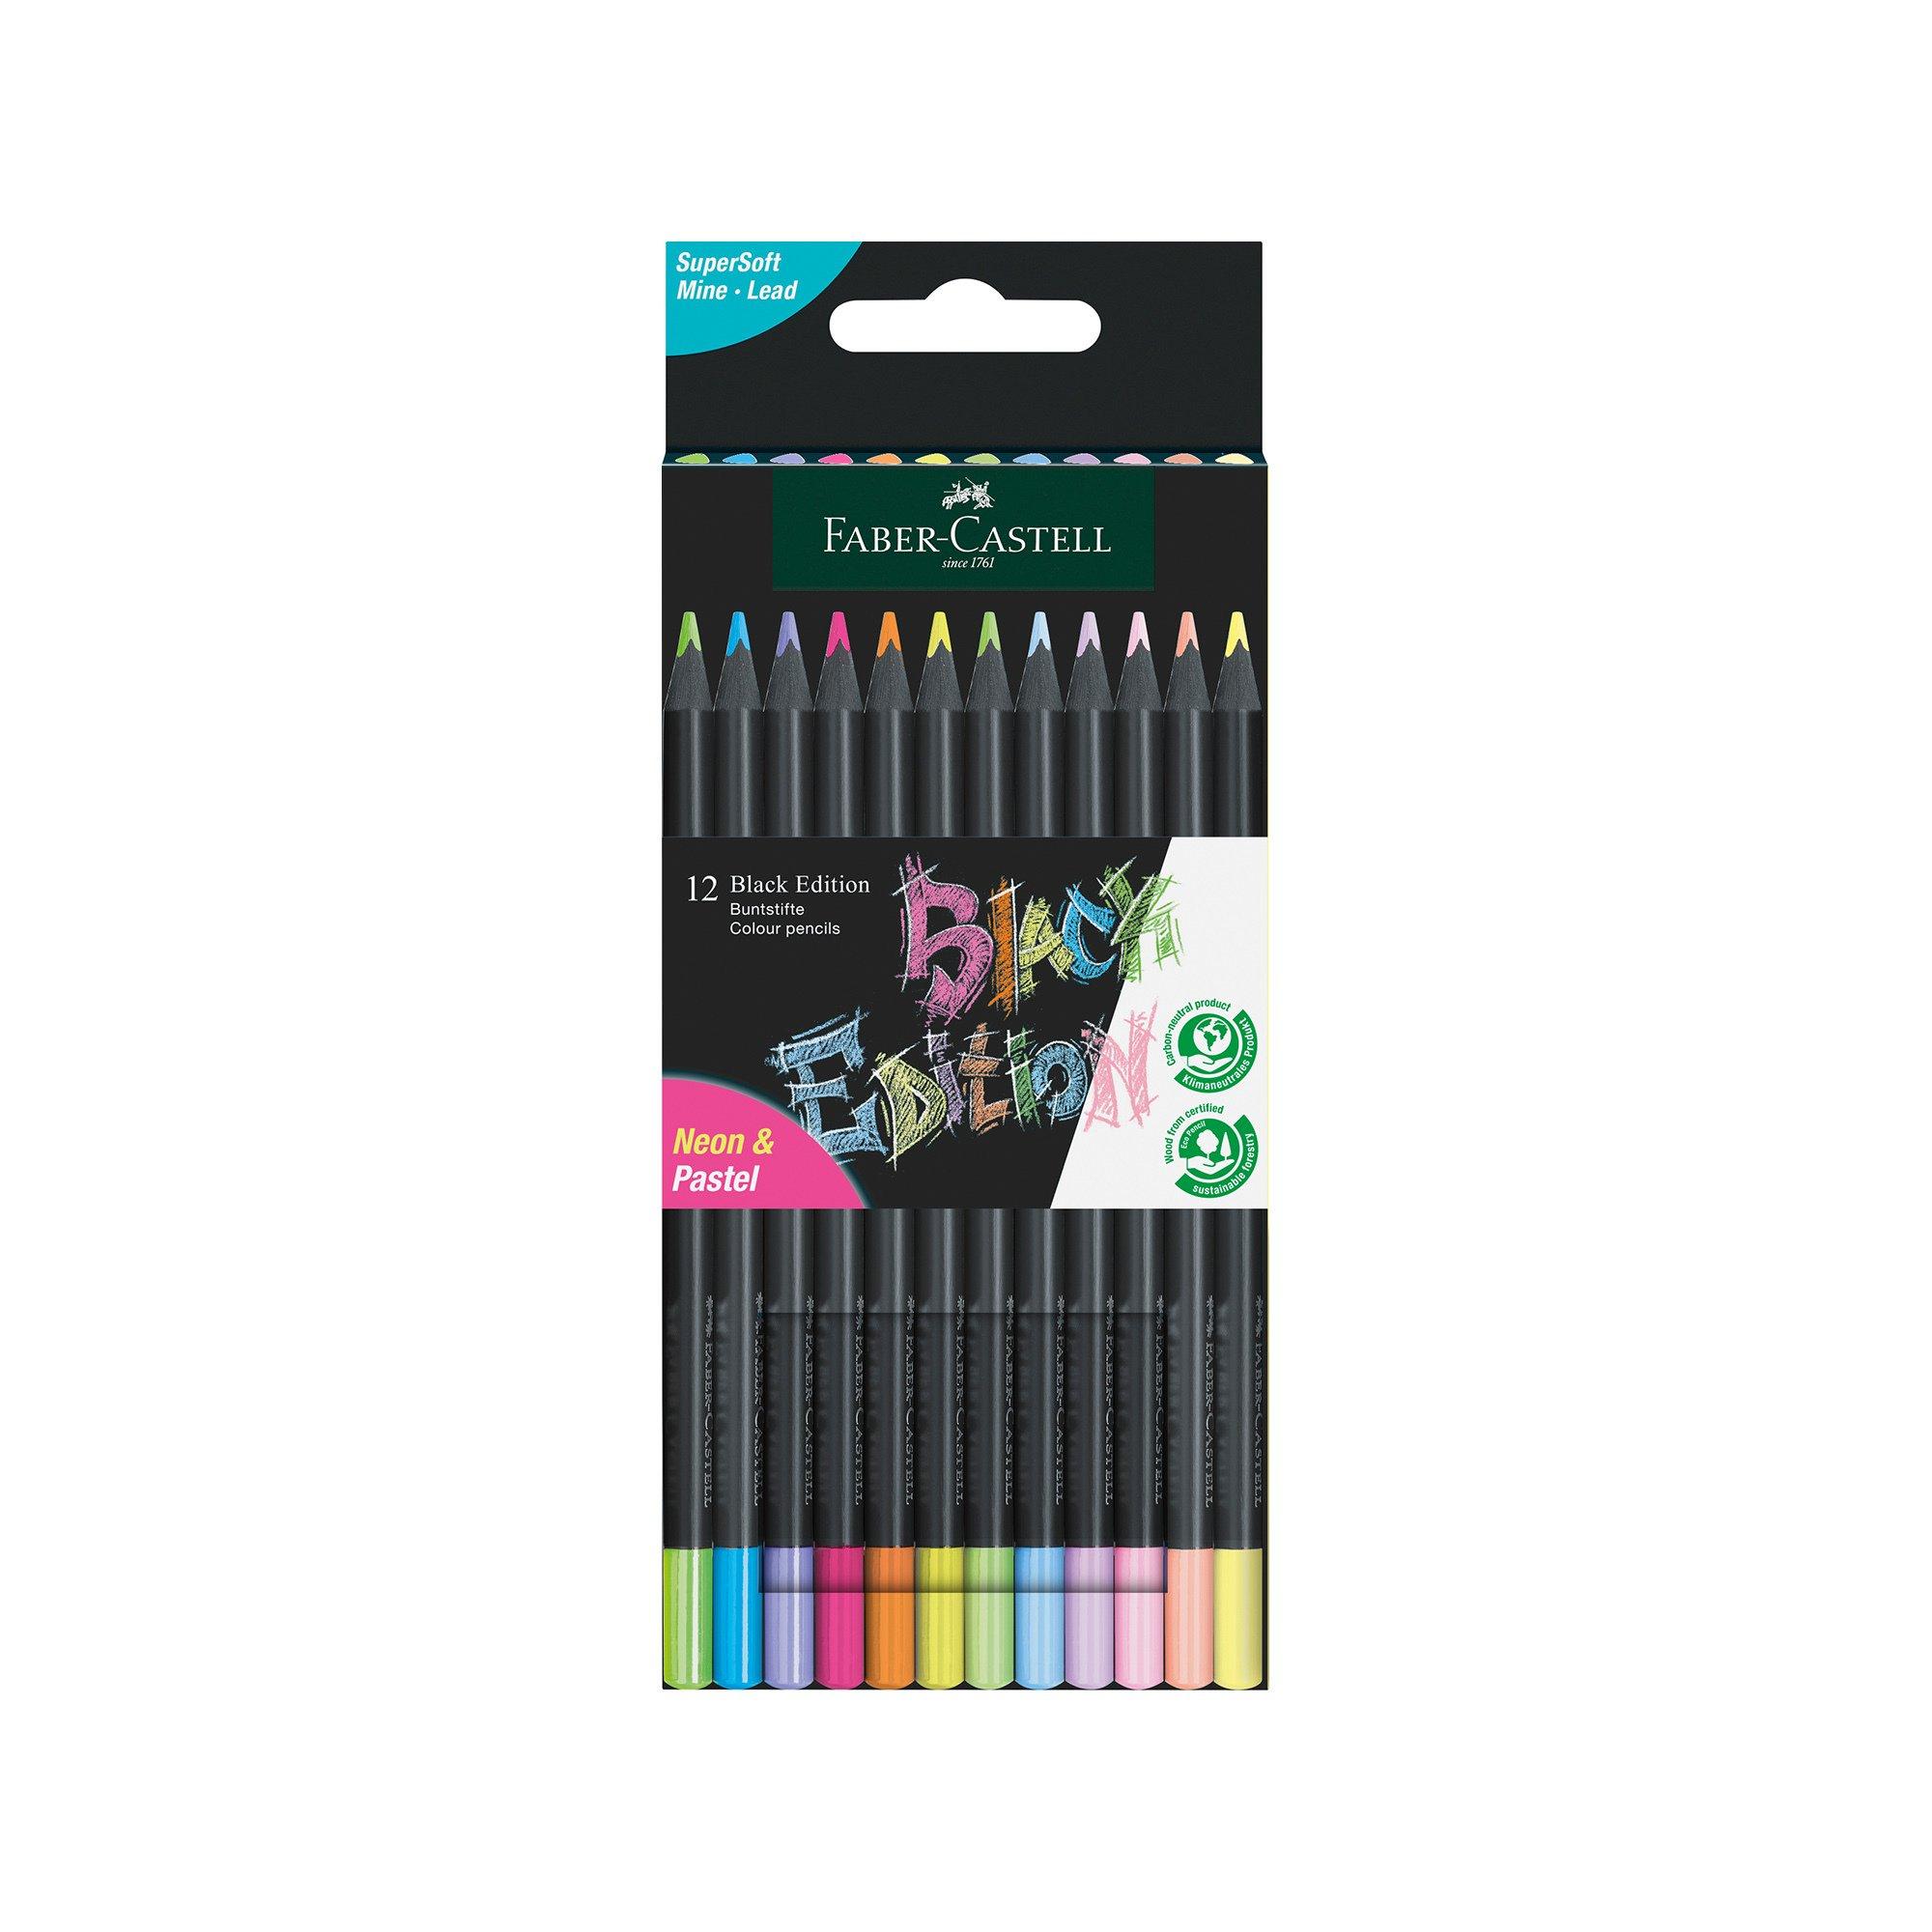 Faber-Castell Matite colorate Black Edition Neon + Pastell 